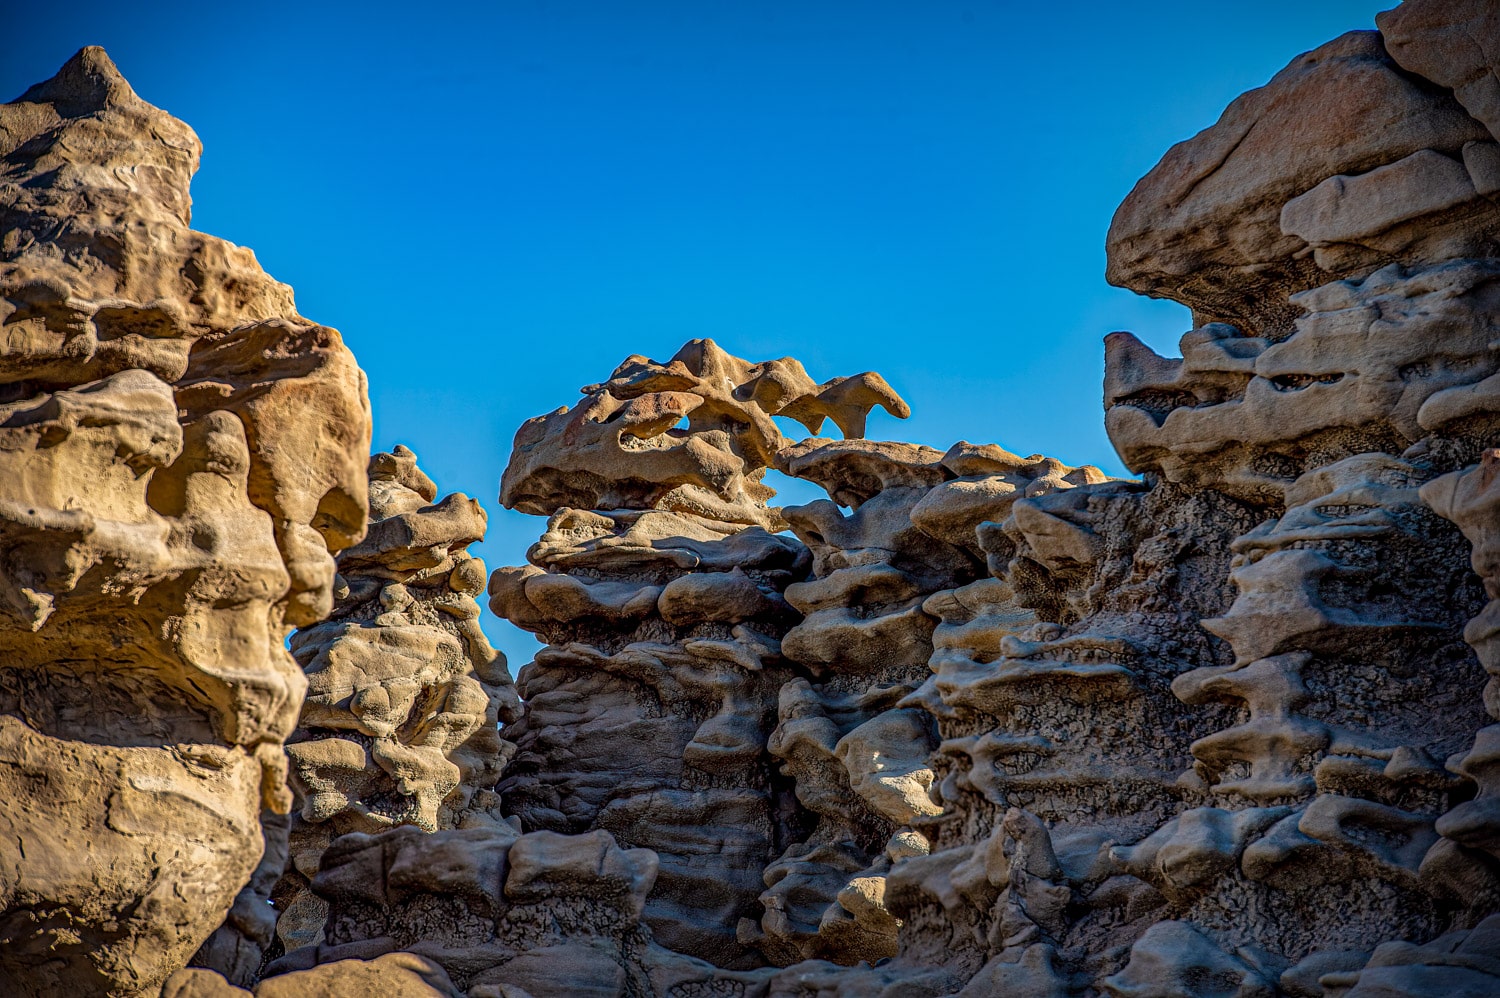 A sunrise view of fanciful figures naturally sculpted in the sandstone of Fantasy Canyon, south of Vernal, Utah.